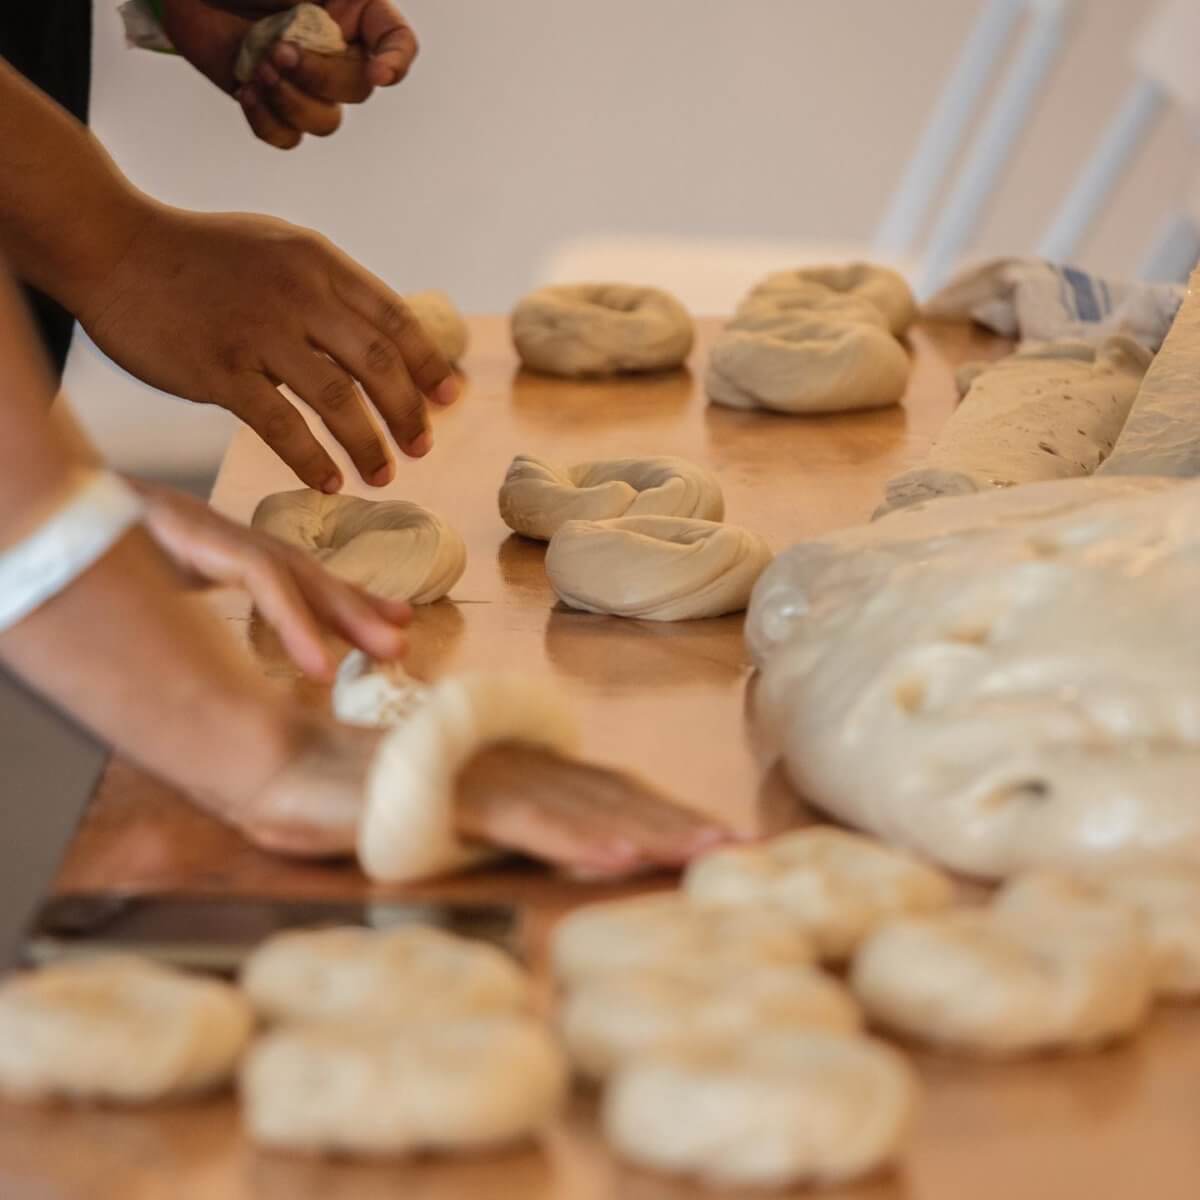 people making bagels by hand